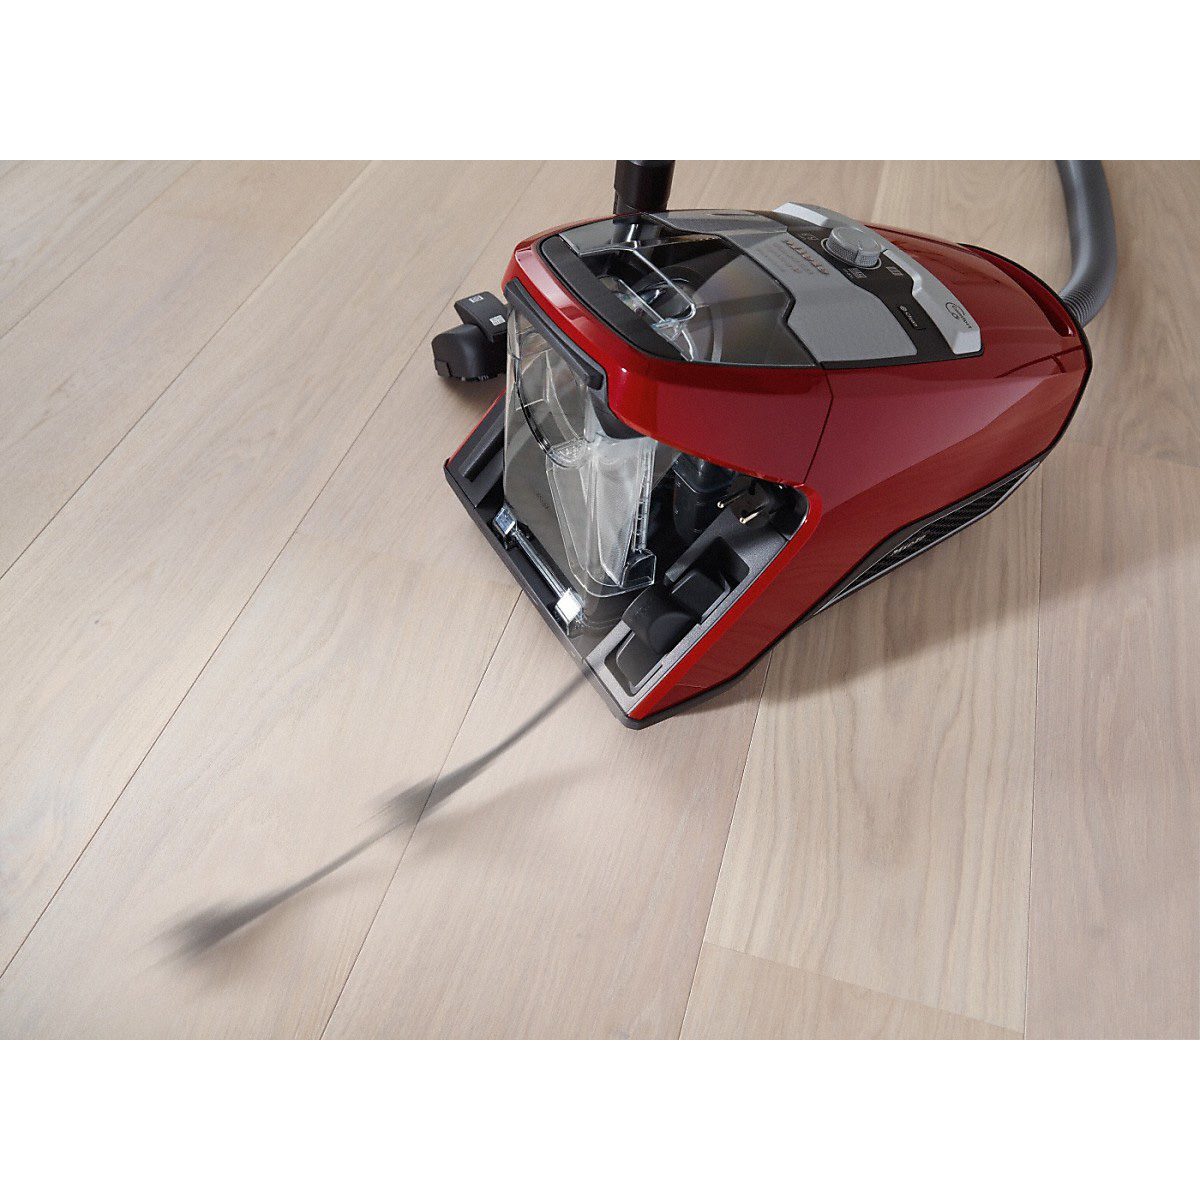 Miele Blizzard CX1 Red EcoLine - SKRP3 Bagless Vacuum Cleaners - Electric - Electrical Appliances in Cyprus